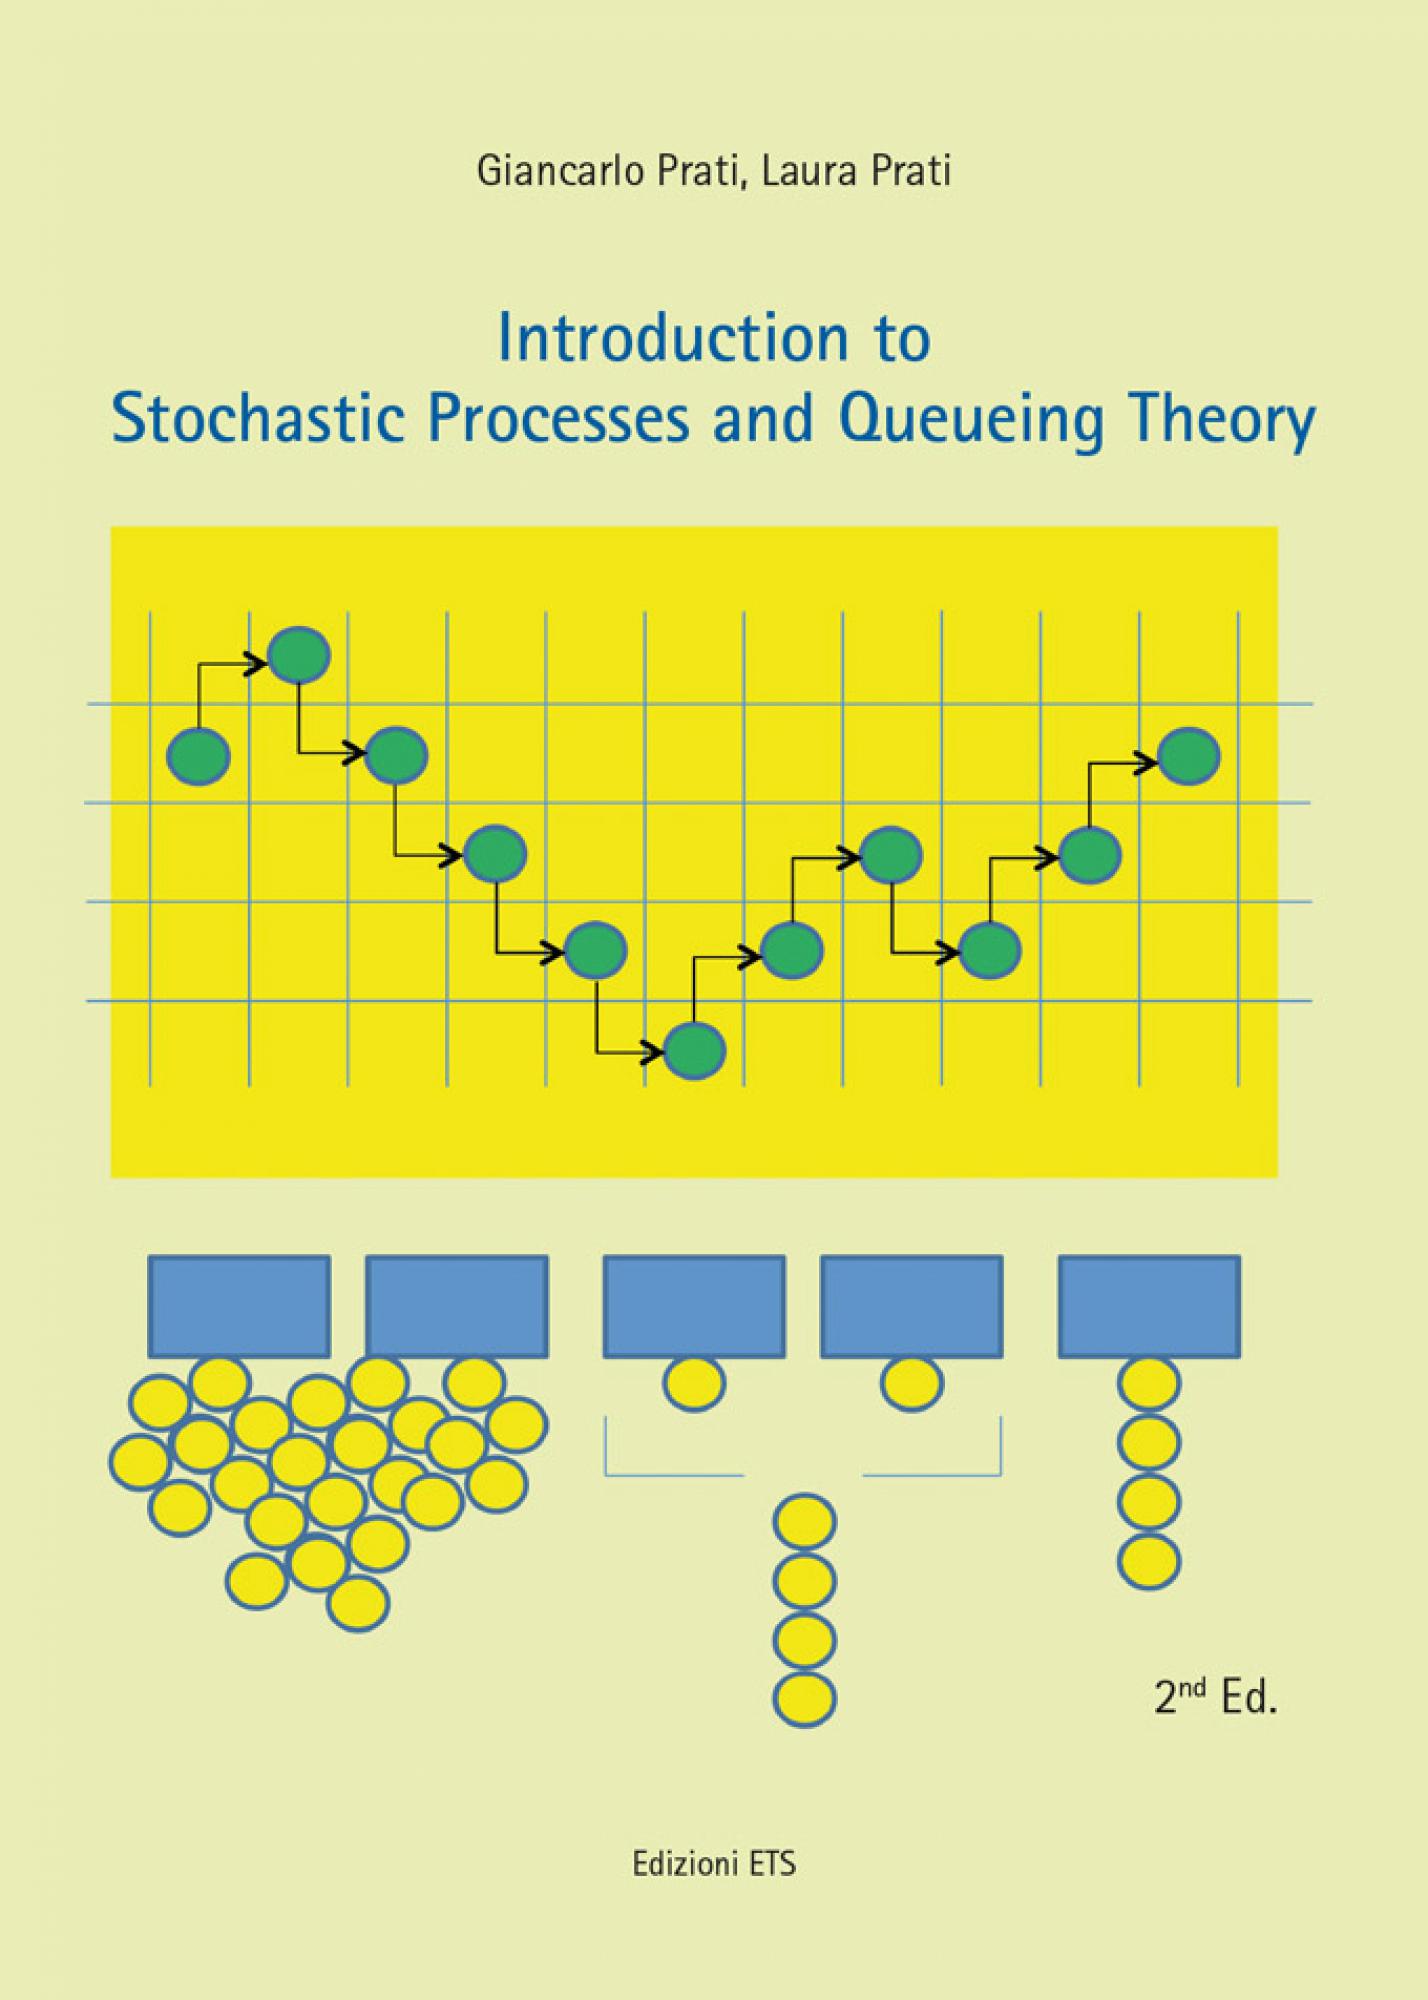 Introduction to Stochastic Processes and Queueing Theory.Second Edition